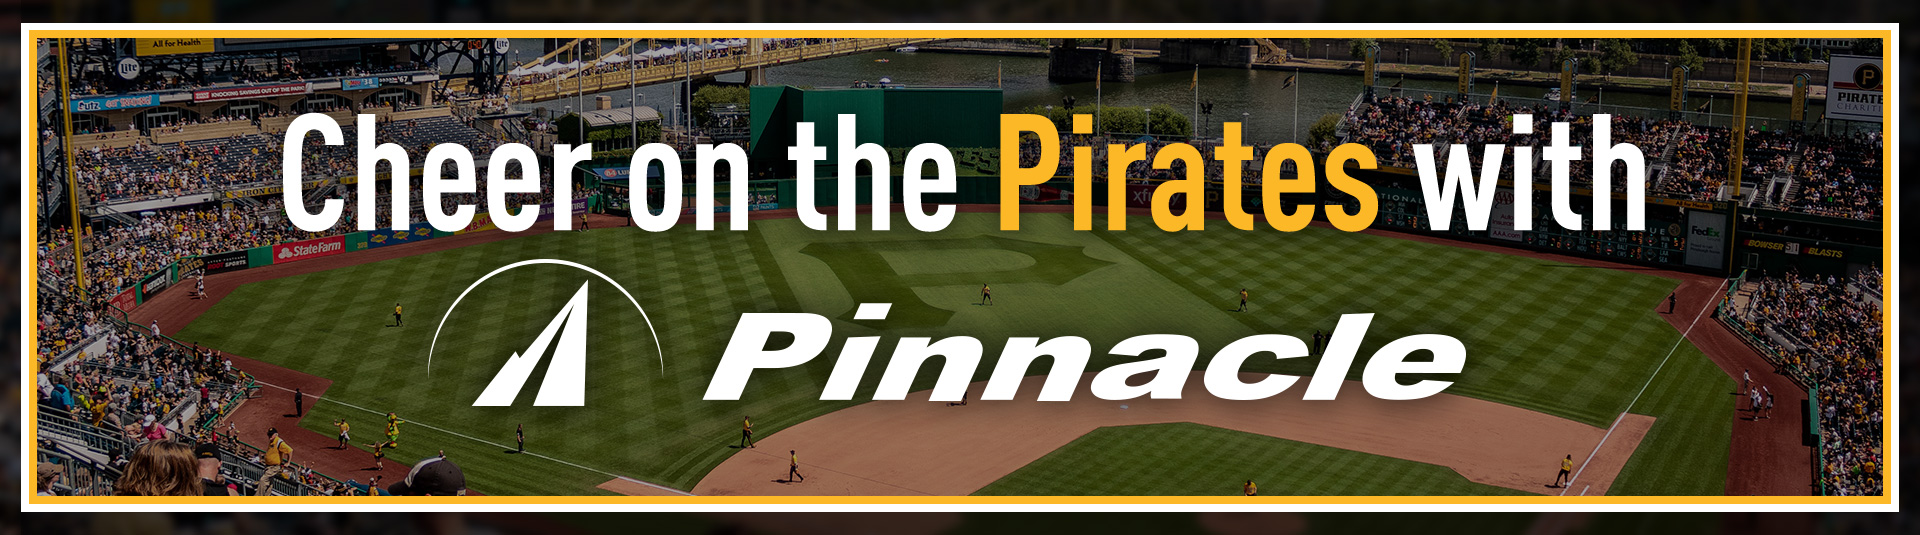 Cheer on the Pirates with Pinnacle Online Banner